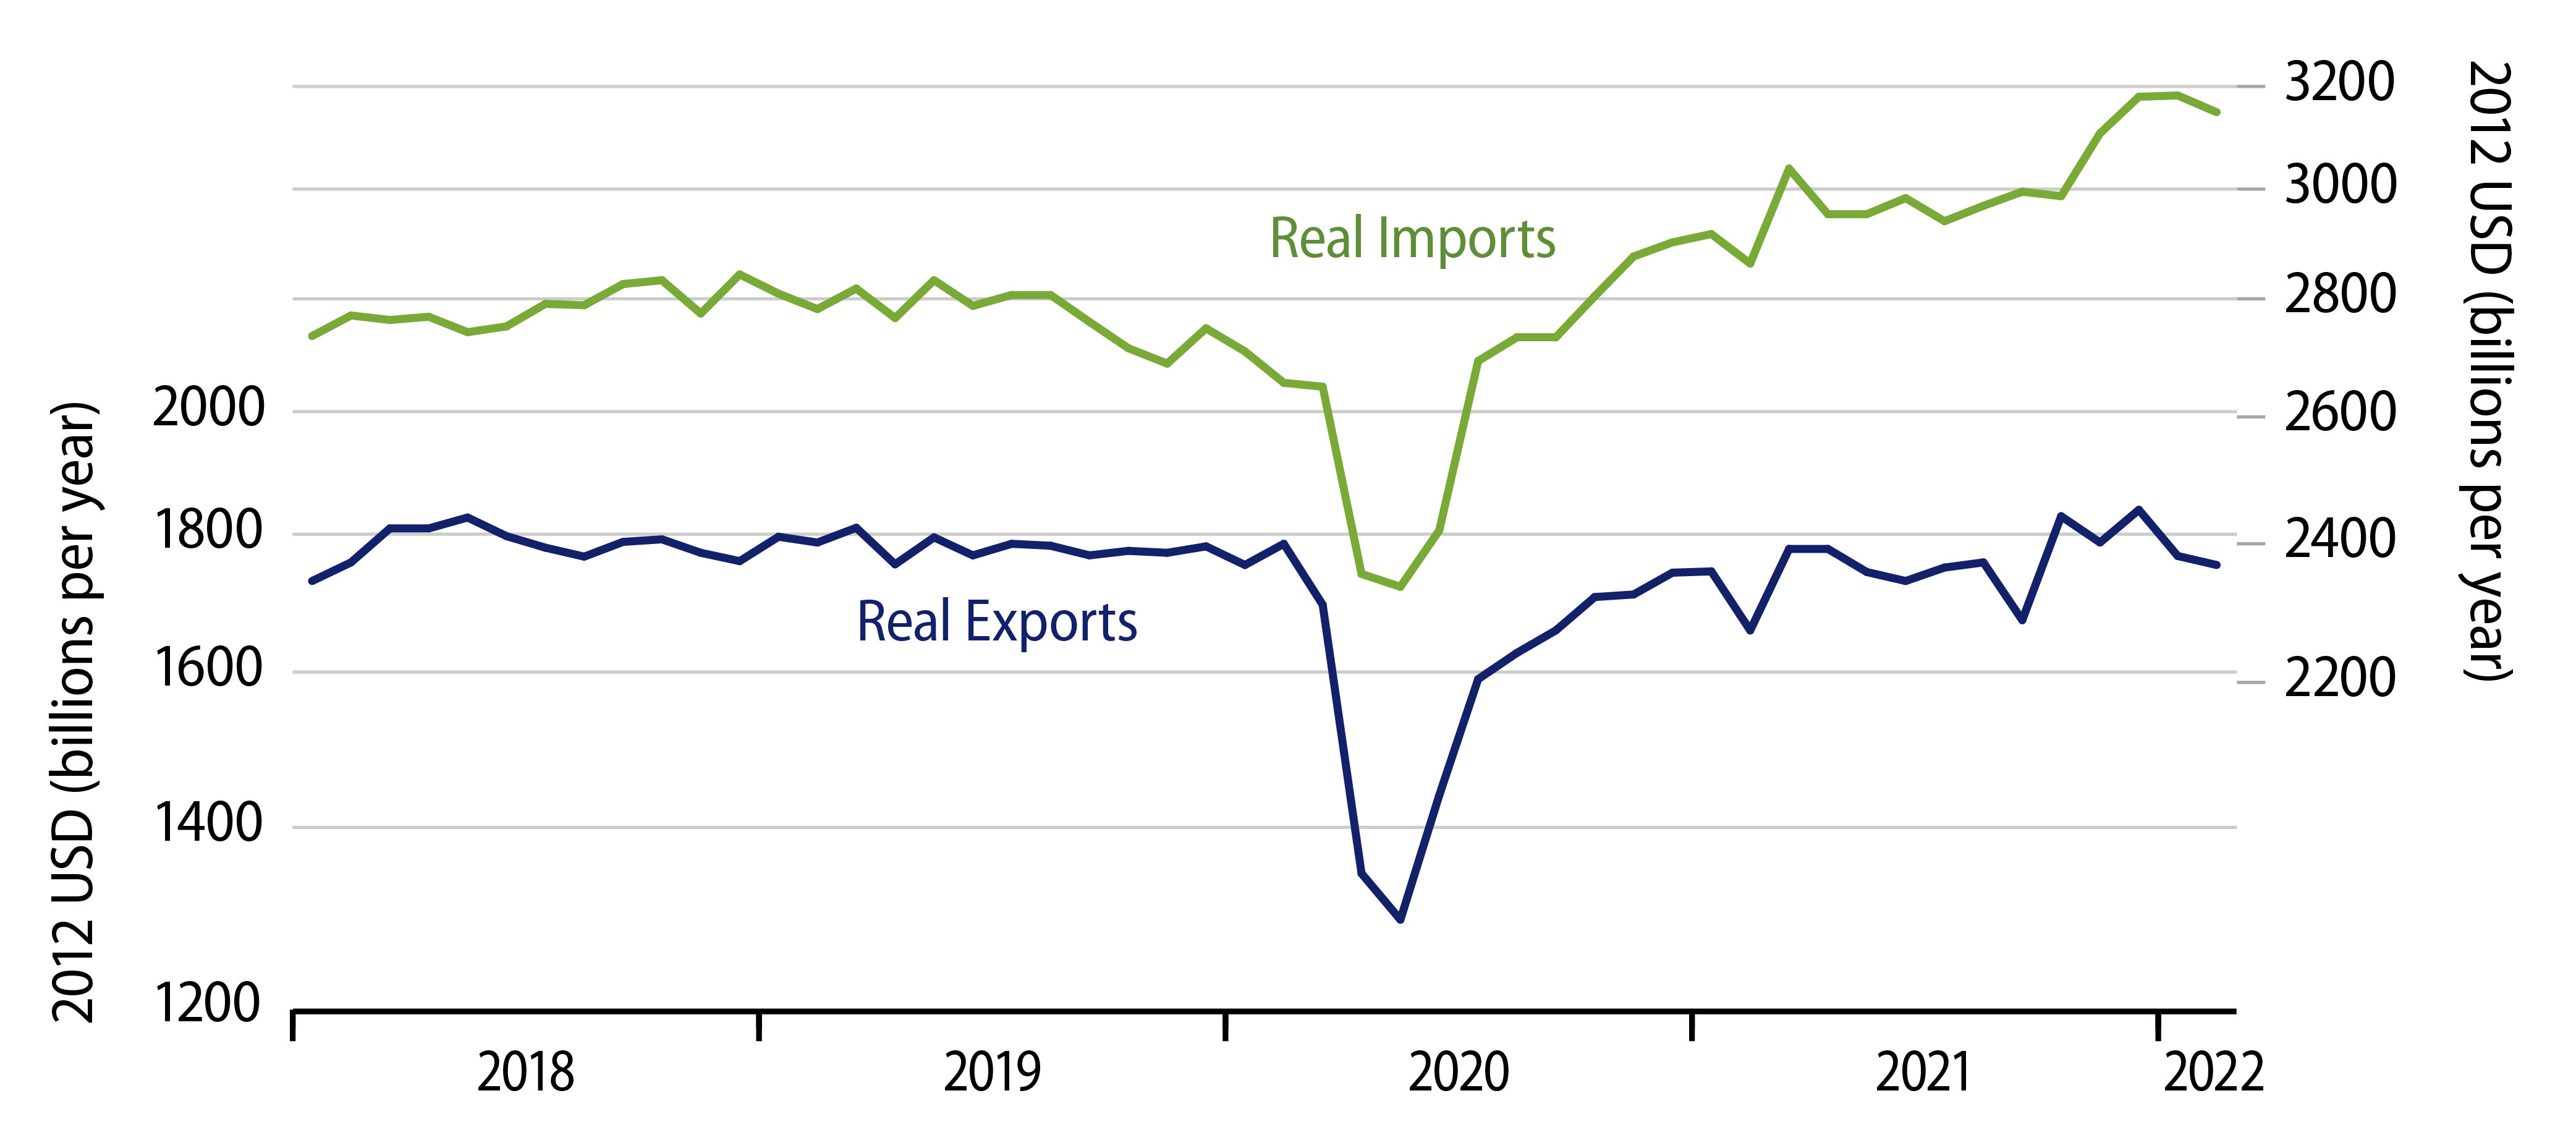 Real Exports & Imports of Goods